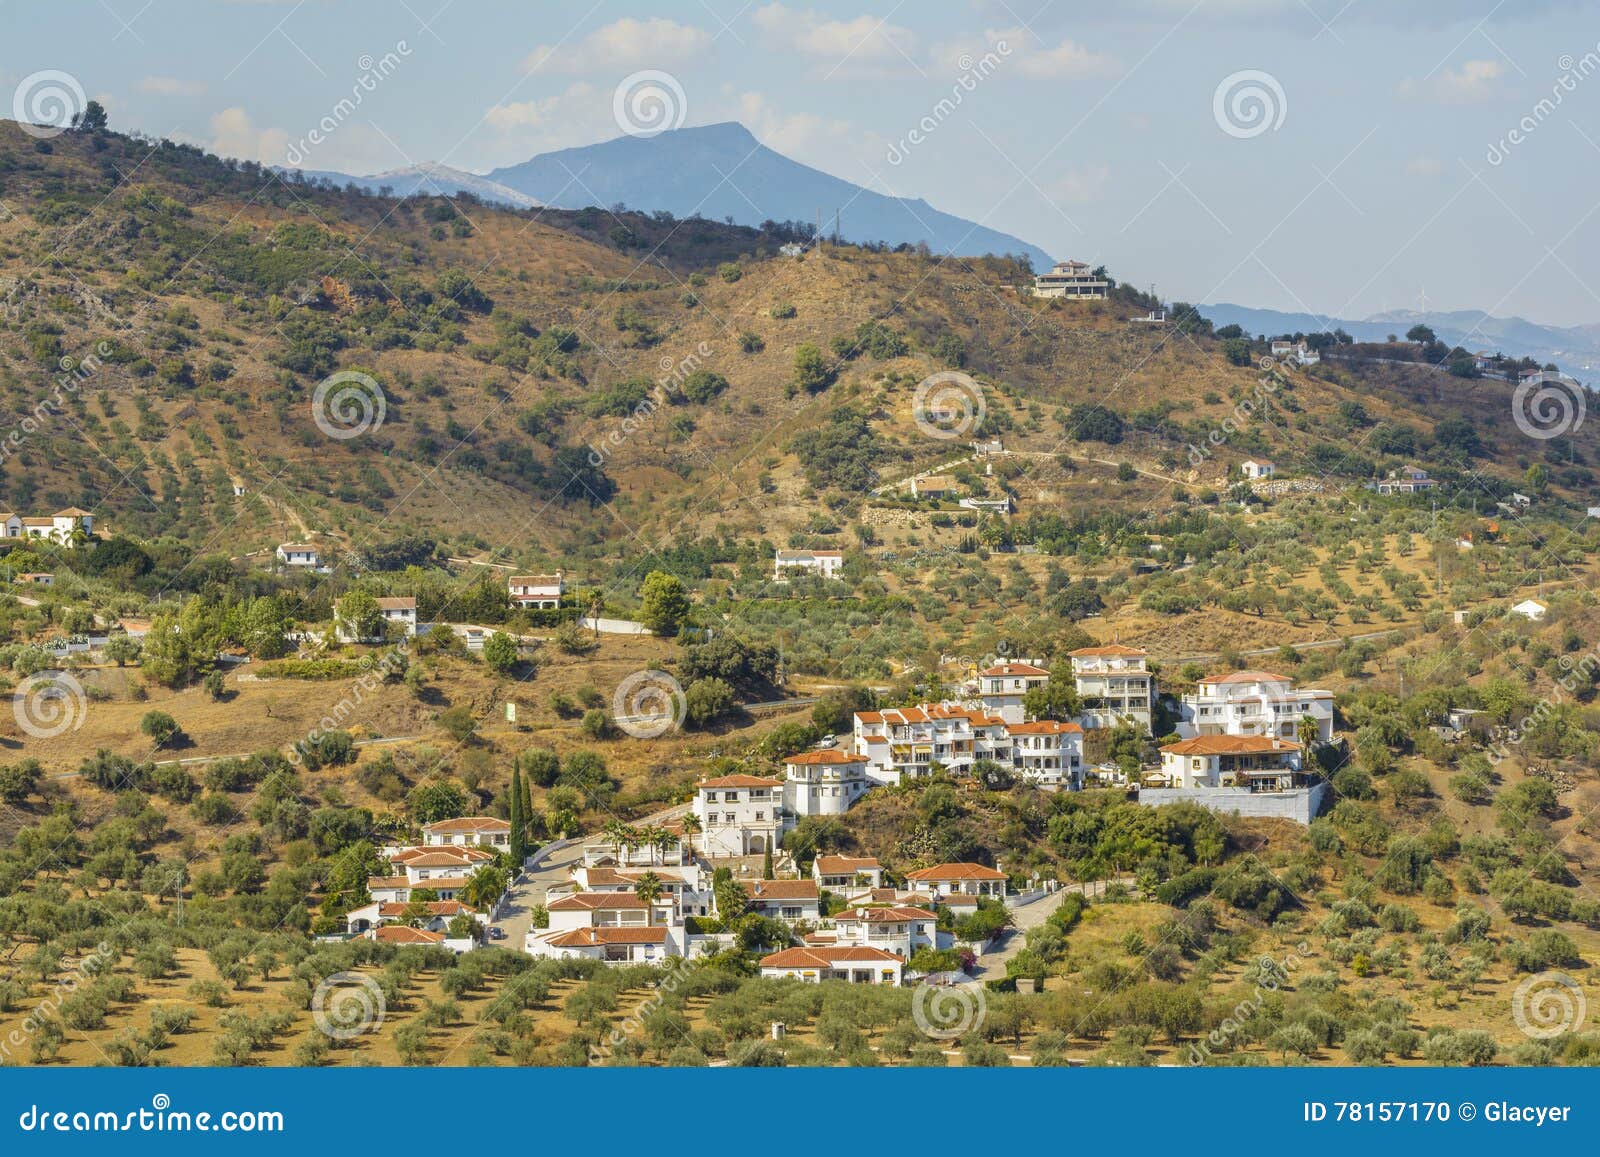 villages in malaga province, andalucia, spain